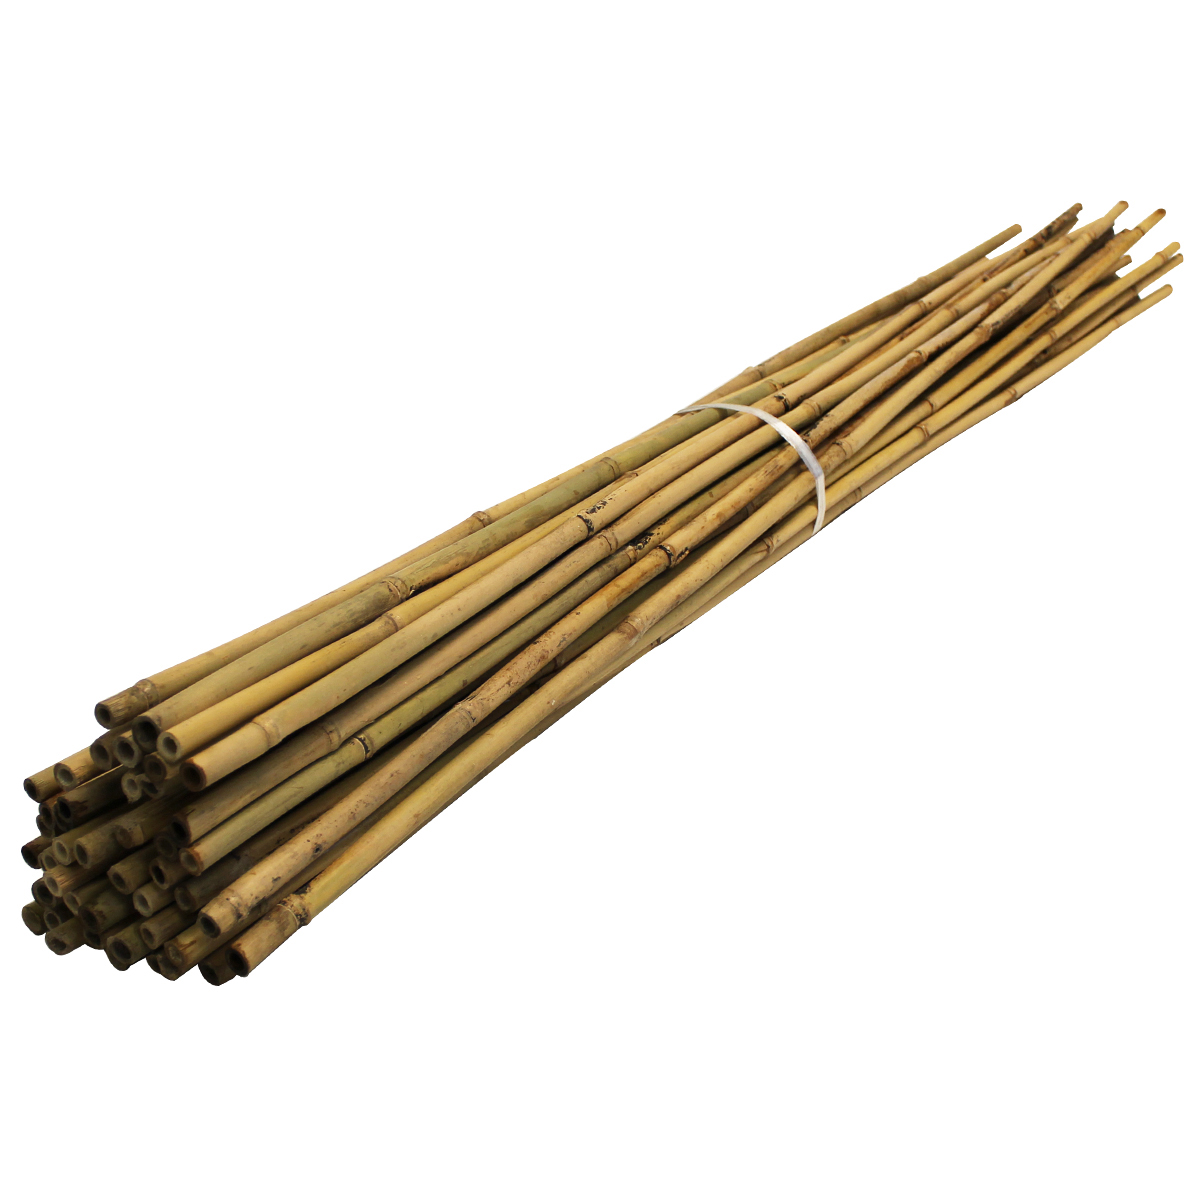 6FT EXTRA STRONG GARDEN CANES PROFESSIONAL 10-12MM BAMBOO FENCING PLANT SUPPORT 